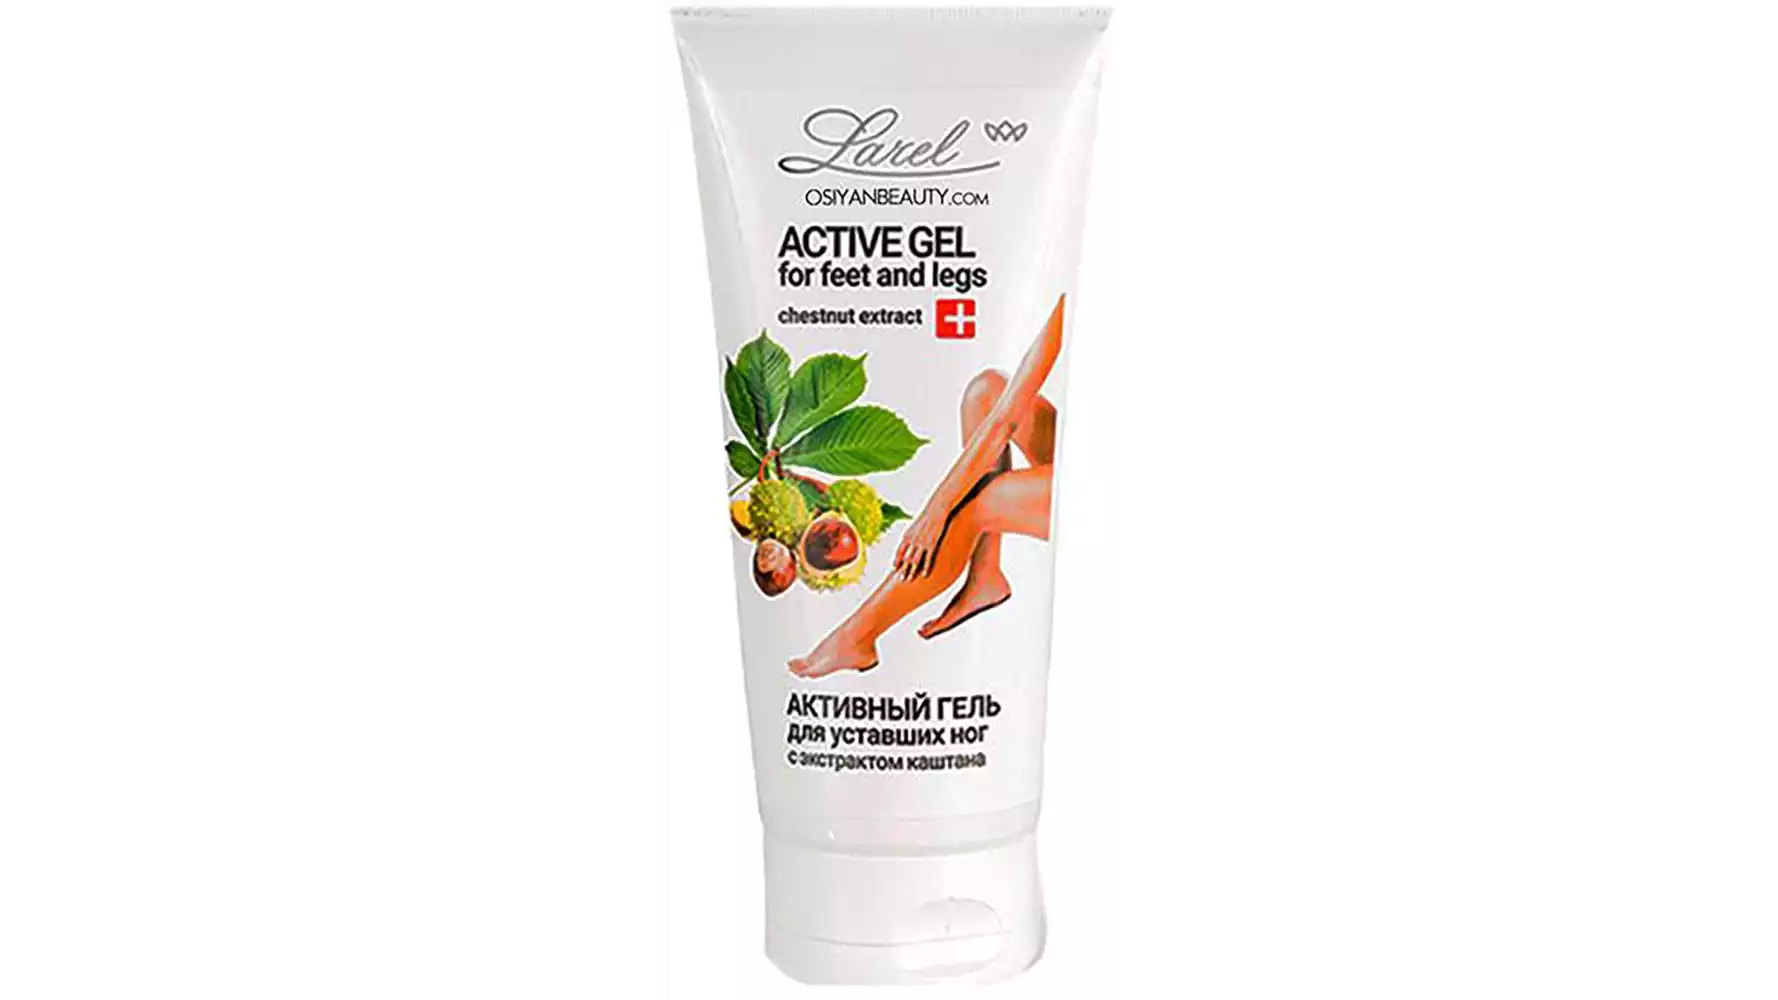 Larel Active Gel For Feet And Legs With Chestnut Extract(Made In Europe) (200ml)